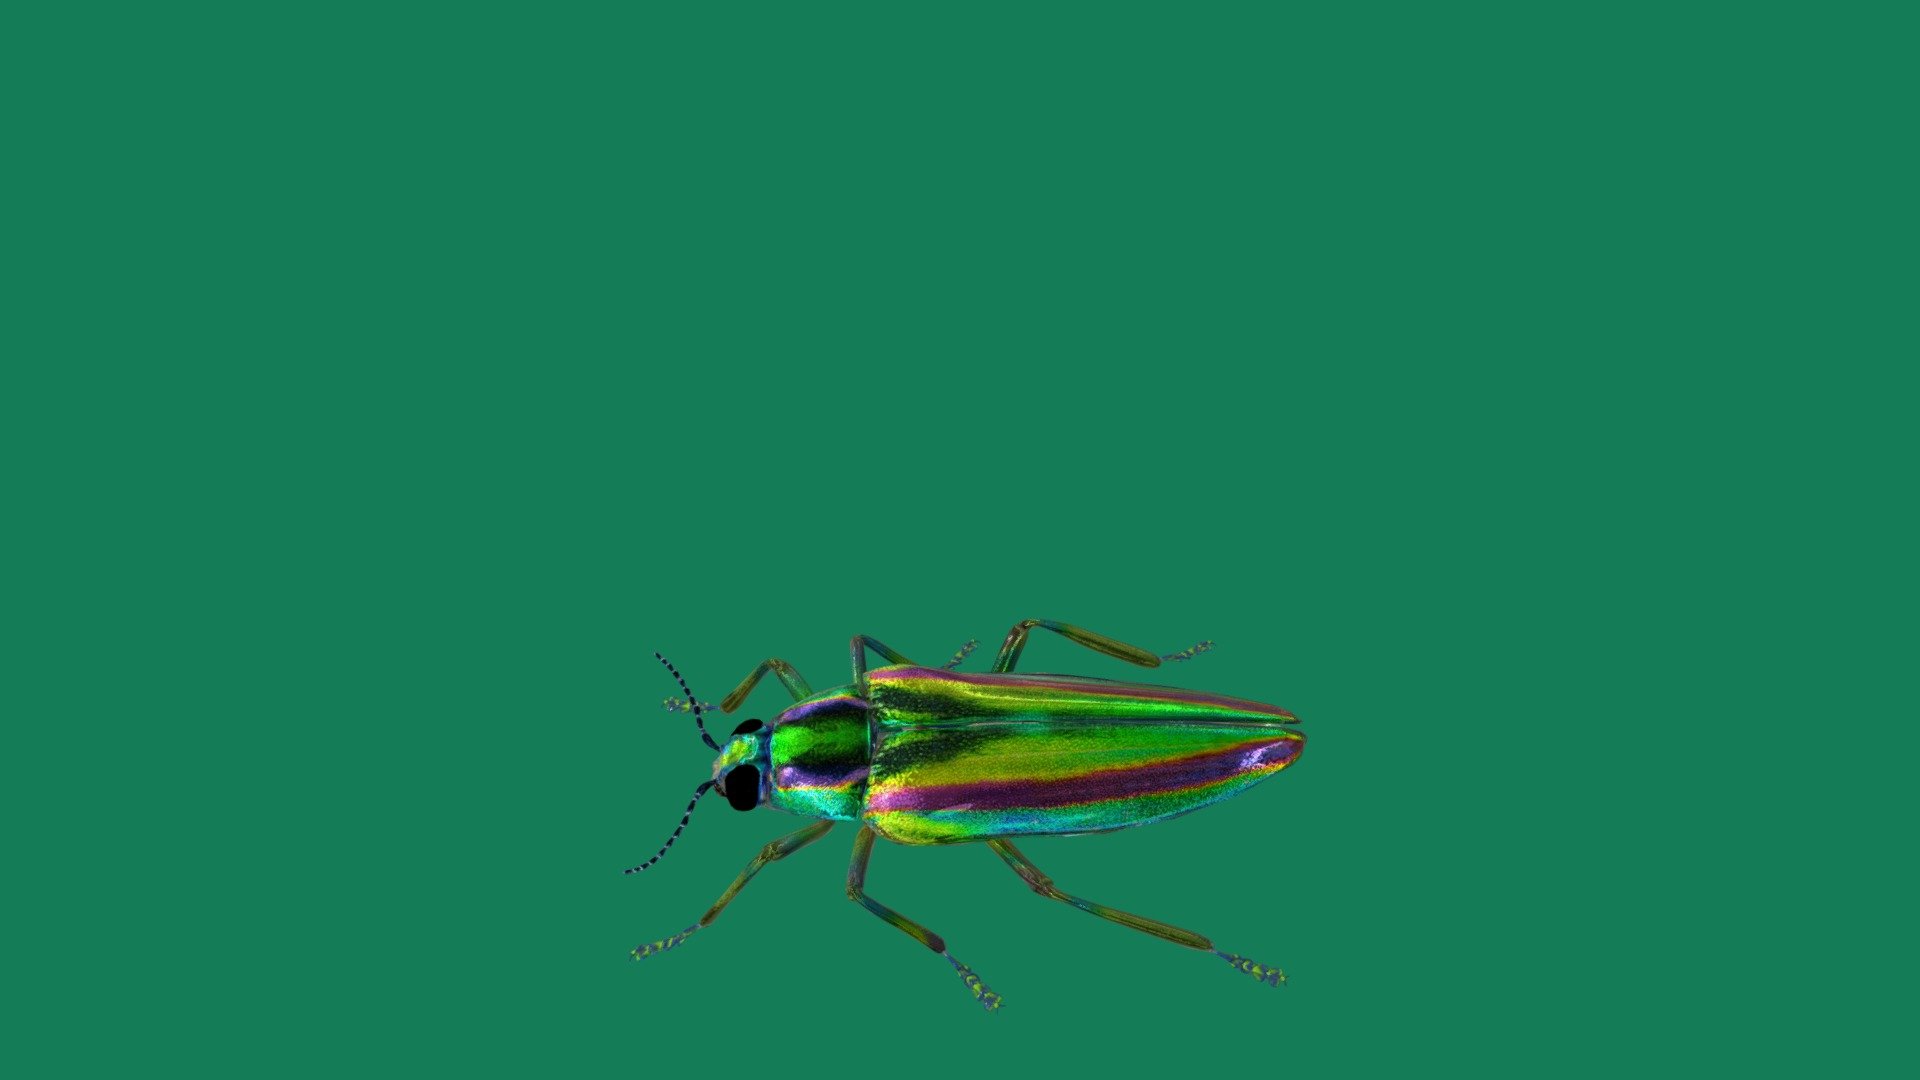 Chrysochroa fulgidissima also known as/ Jewel beetle 
Higher classification: Chrysochroa
Scientific name: Chrysochroa fulgidissima
Family: Buprestidae
Order: Beetle
Suborder: Polyphaga
Biological rank: Species - Jewel Beetle (Non-Commercial) - Download Free 3D model by Nyilonelycompany 3d model